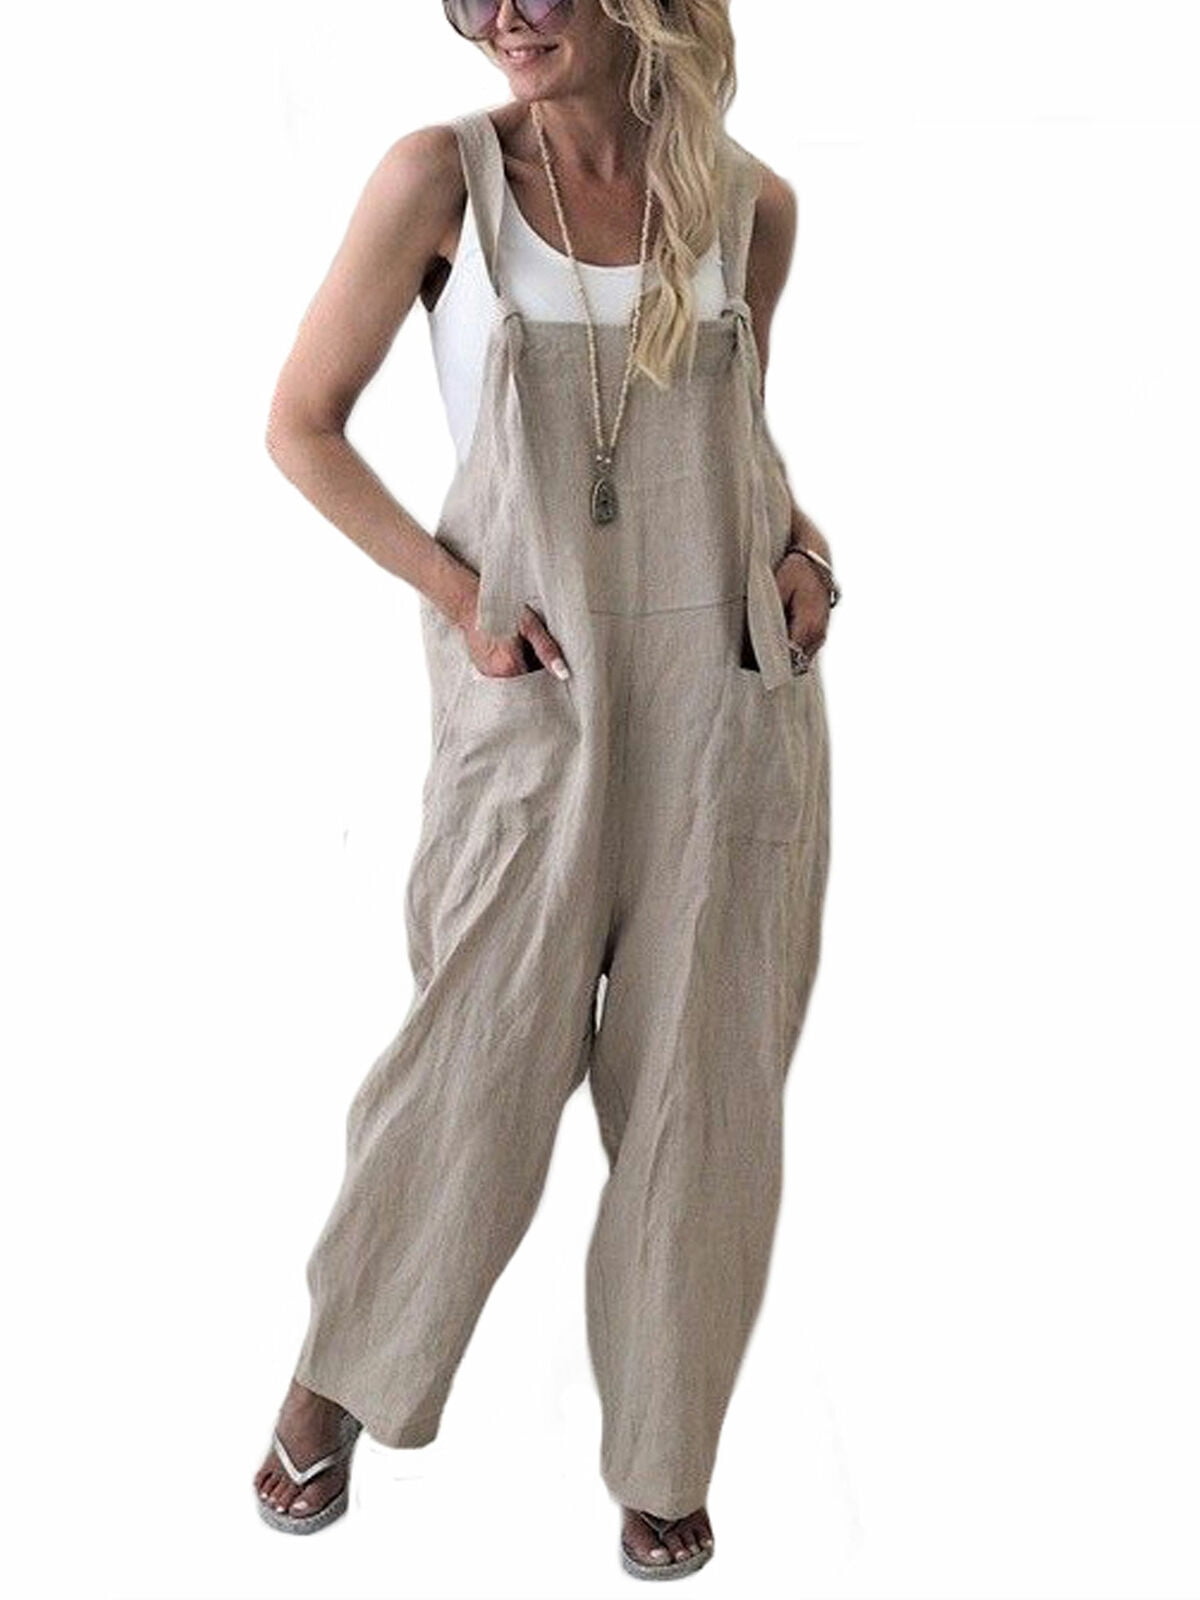 Women Hip Hop Long Sleeve Dungaree Romper Playsuit Overalls Long Pants Trousers